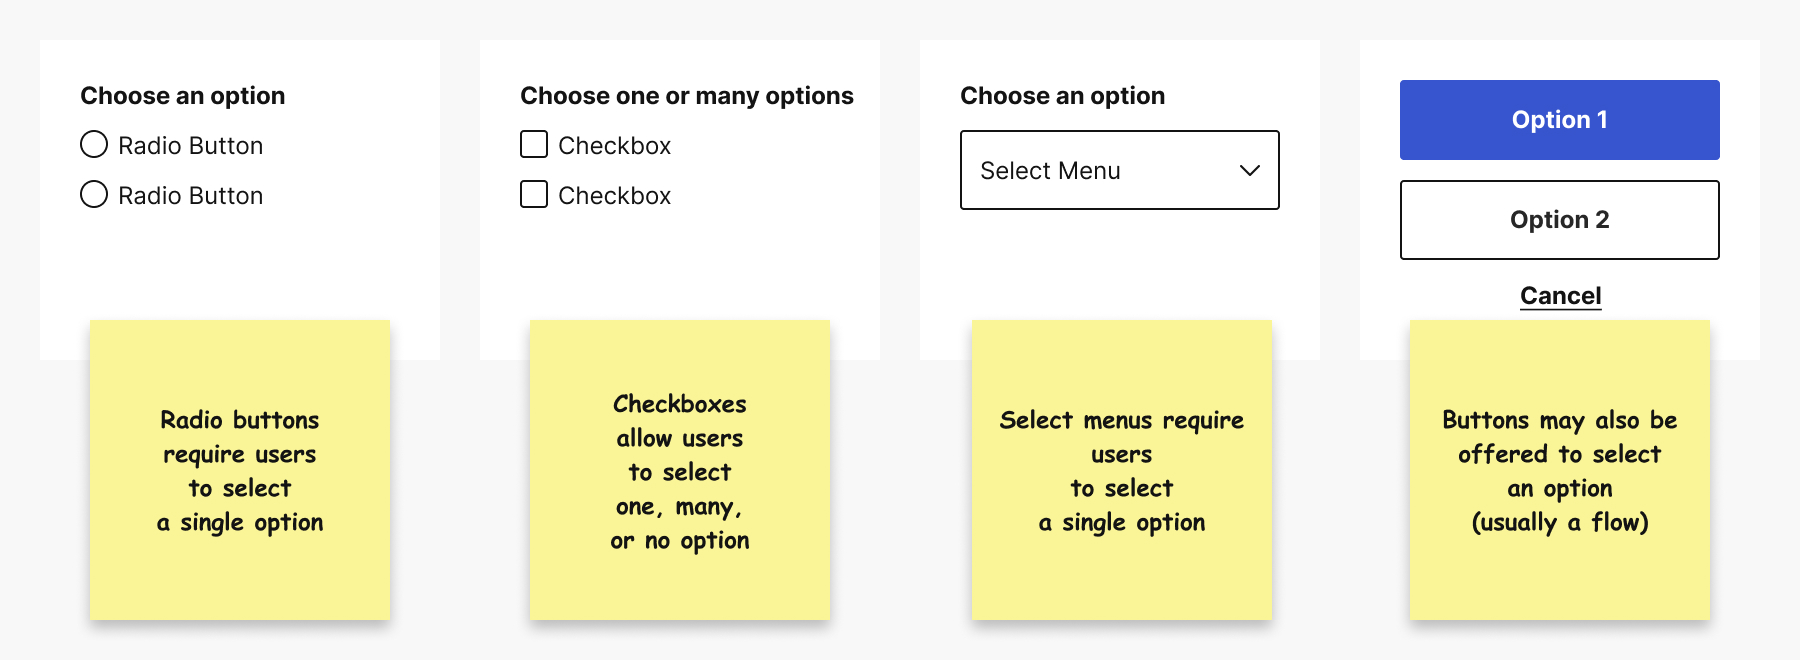 Examples of layouts with radio buttons, checkboxes, select menu and buttons to illustrate how users can be asked to make a choice from a list of options